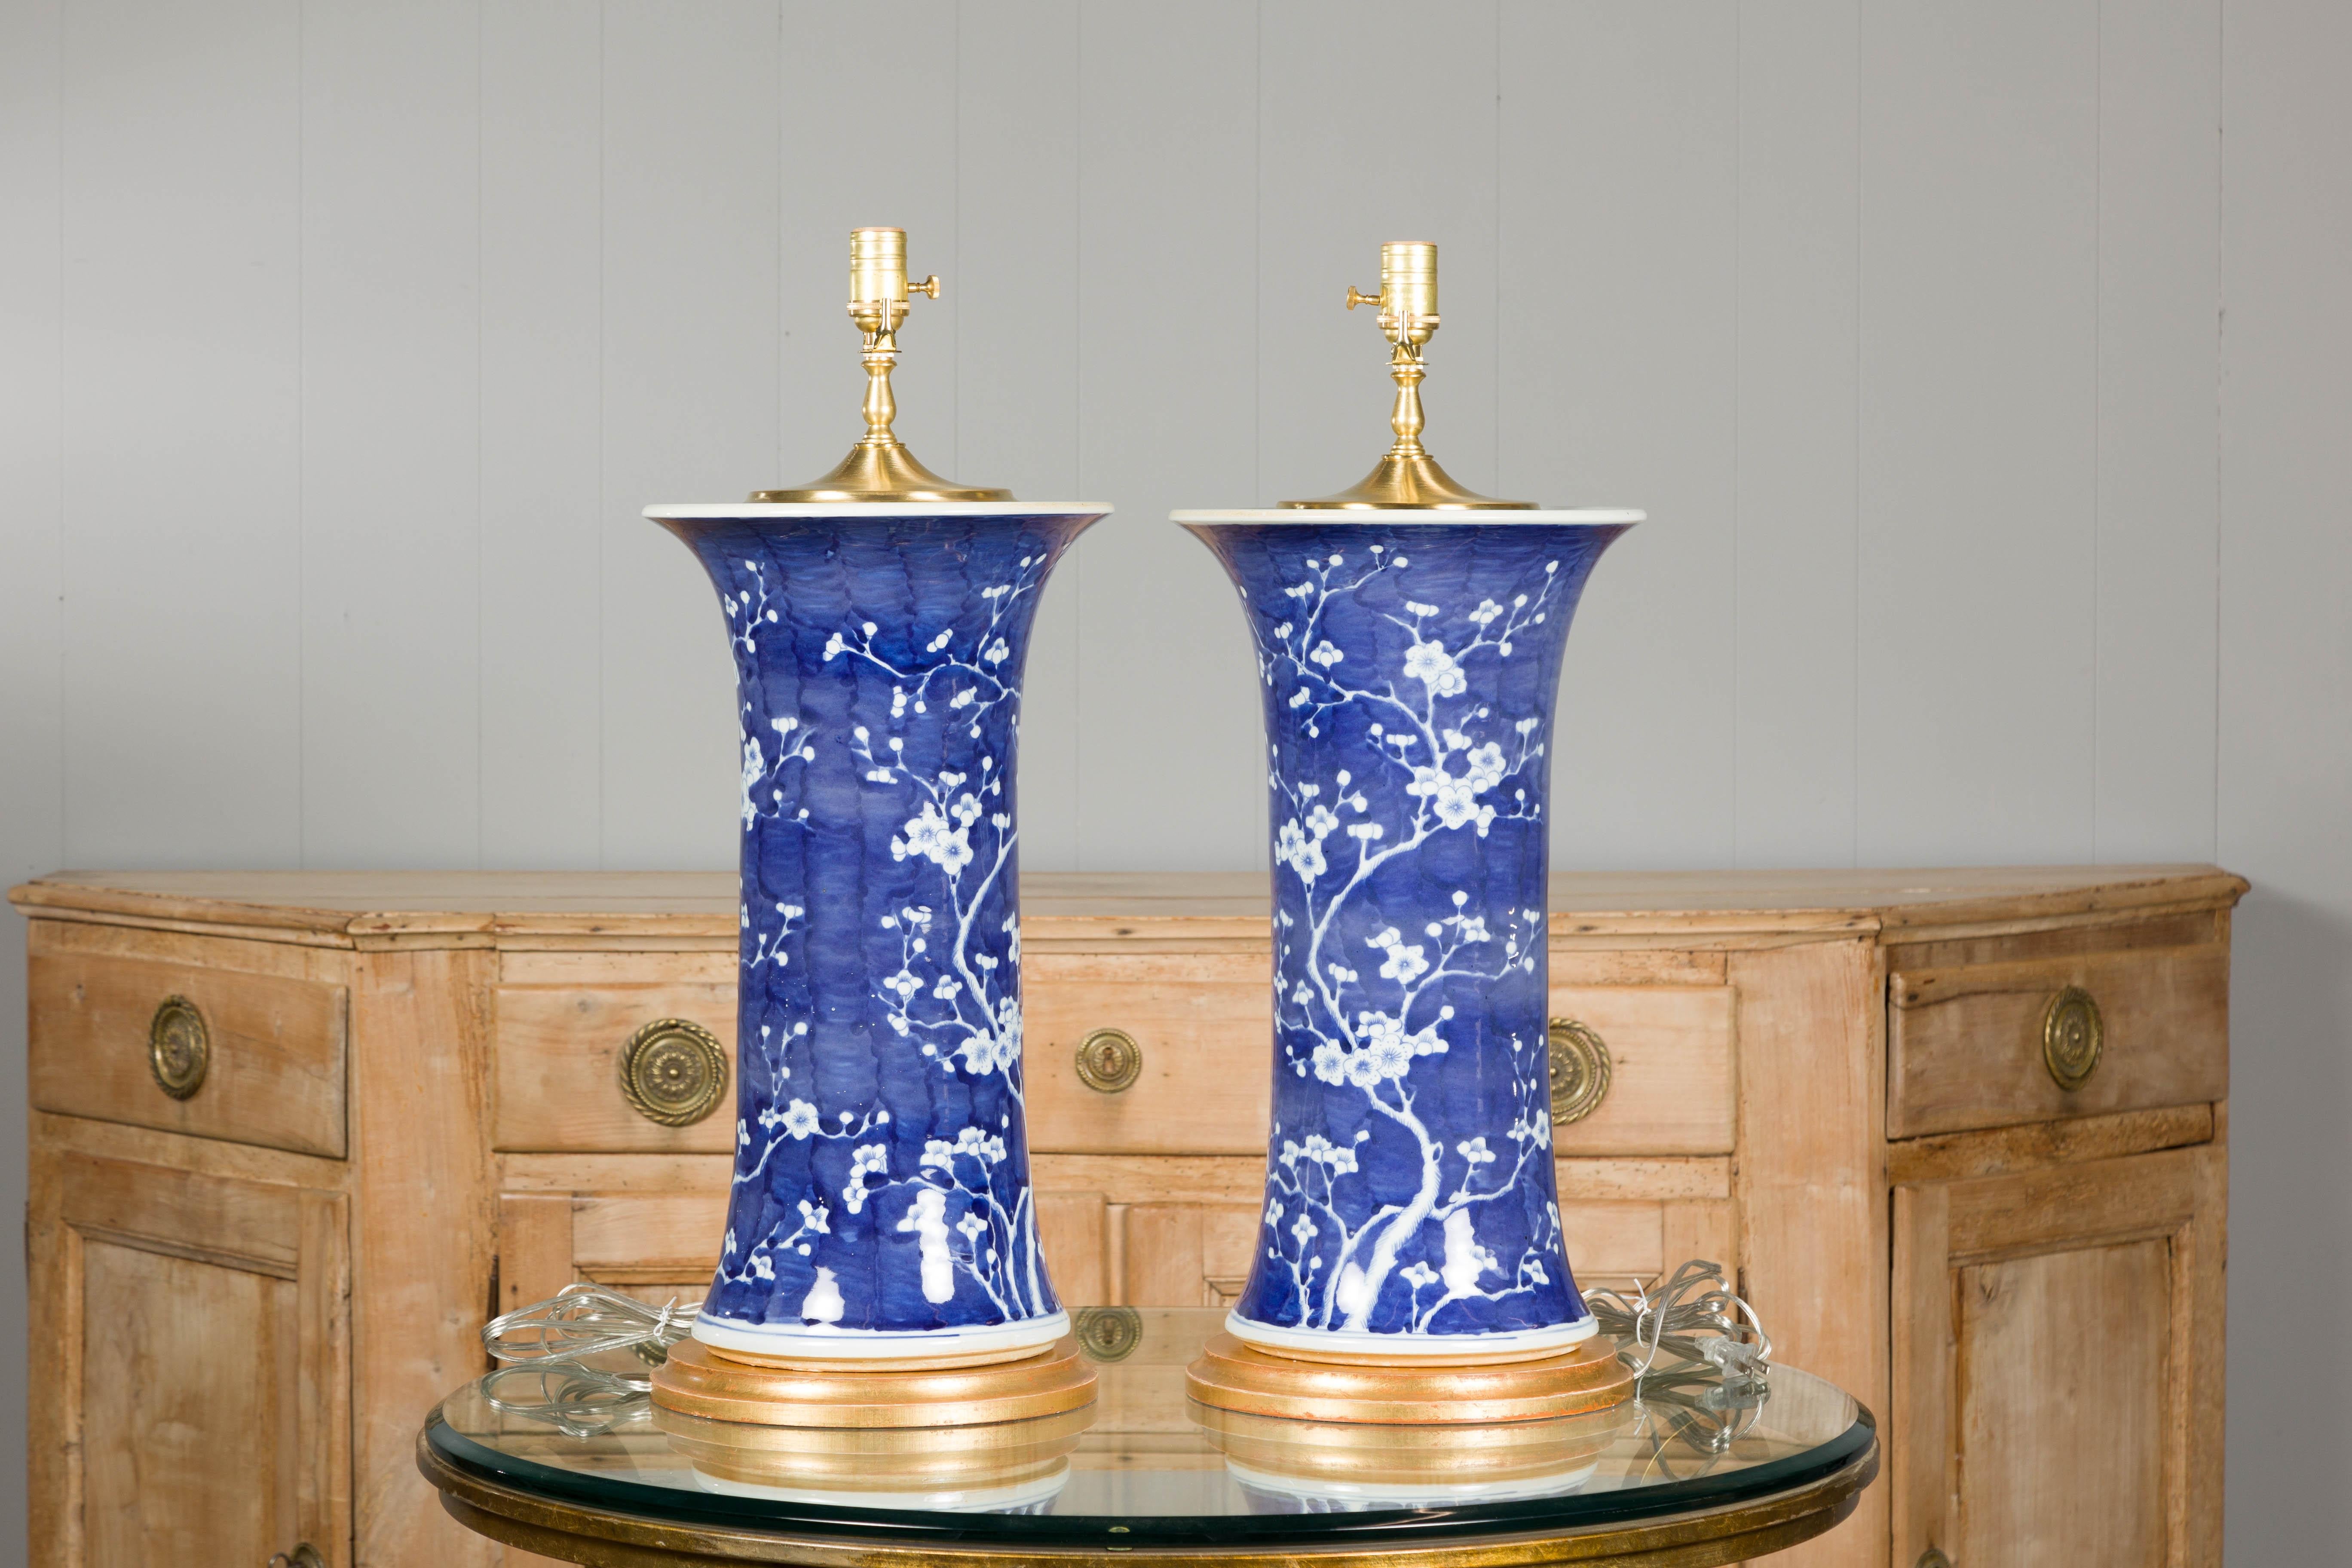 Midcentury Porcelain Blue and White Table Lamps with Blooming Trees, a Pair For Sale 9